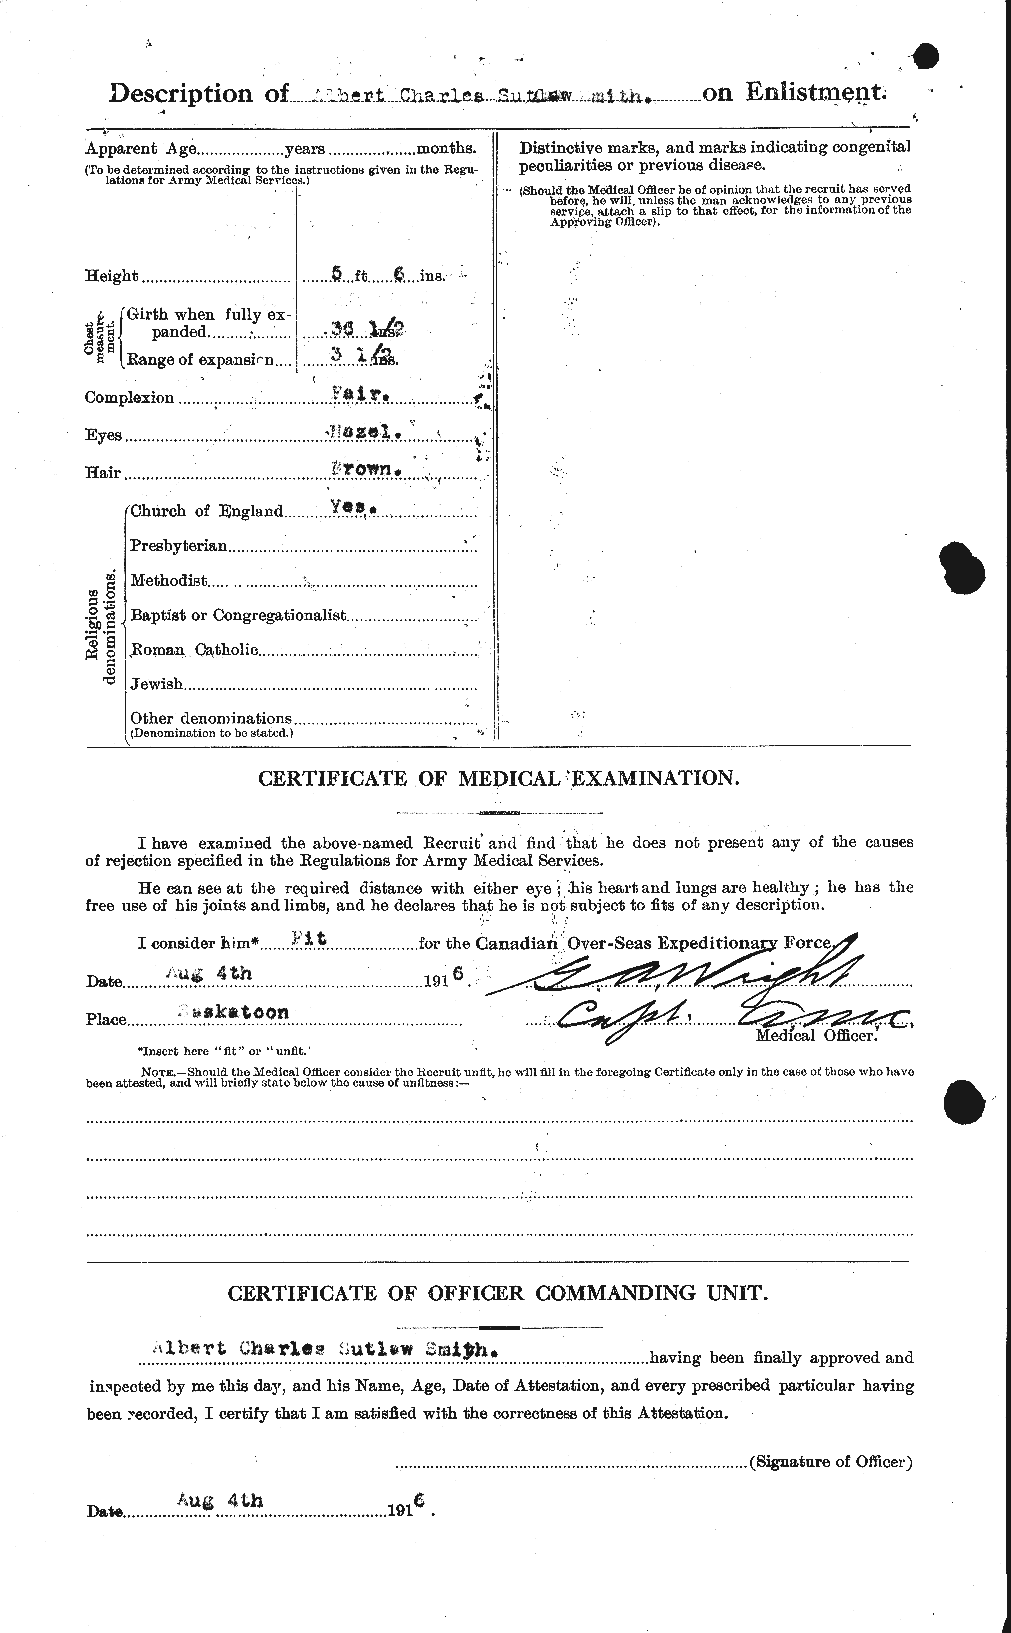 Personnel Records of the First World War - CEF 098957b